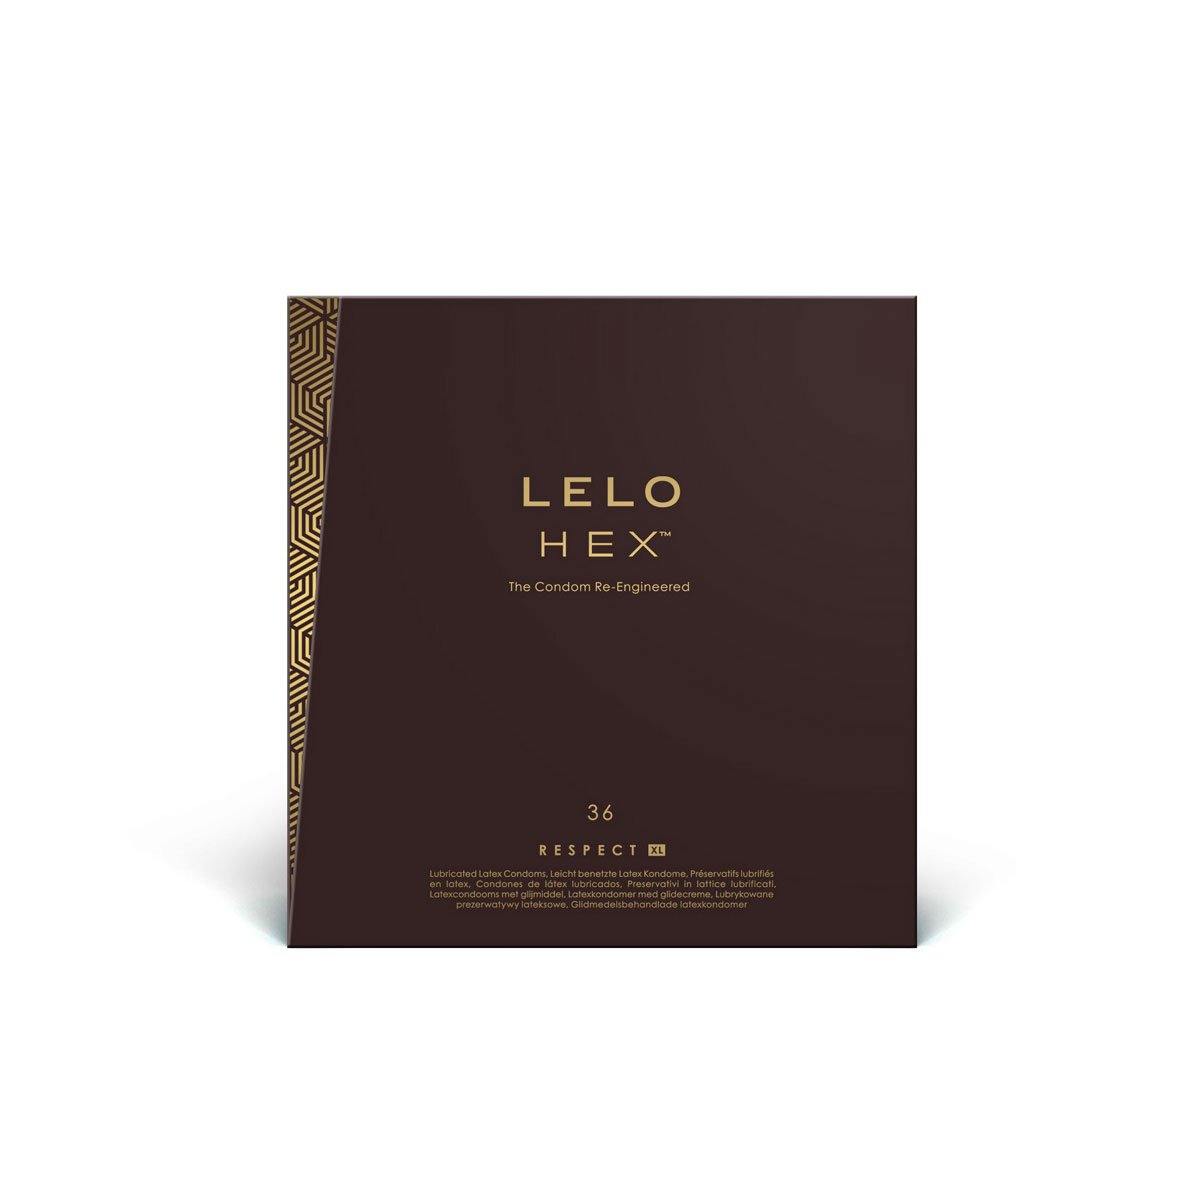 LELO Hex Respect Condoms 36 pk - Buy At Luxury Toy X - Free 3-Day Shipping